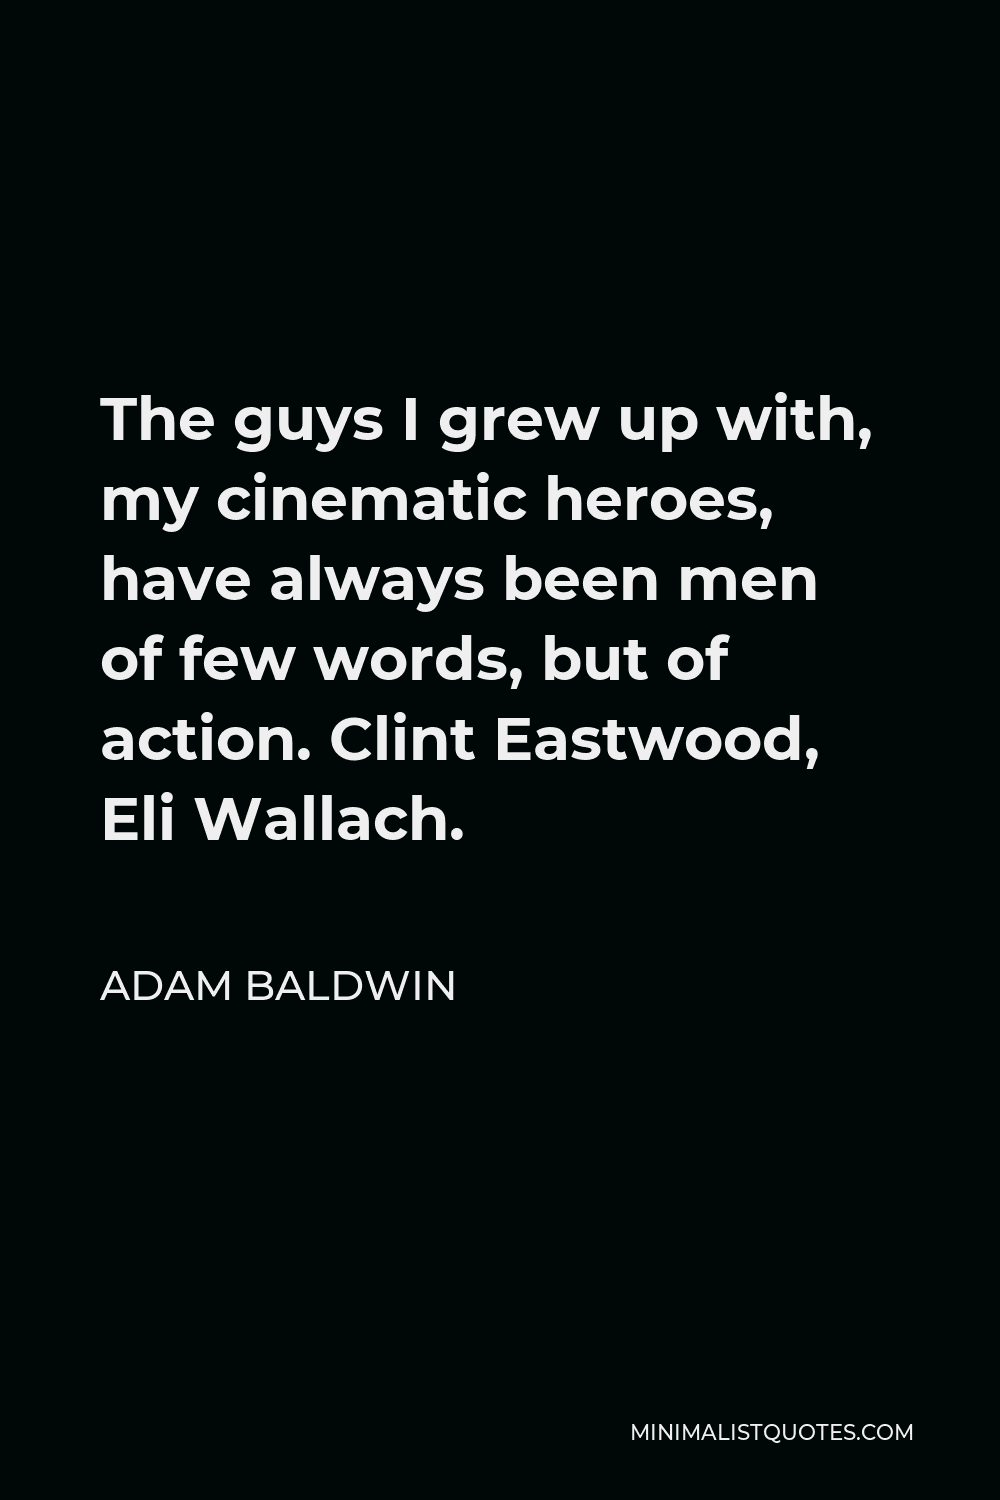 Adam Baldwin Quote - The guys I grew up with, my cinematic heroes, have always been men of few words, but of action. Clint Eastwood, Eli Wallach.